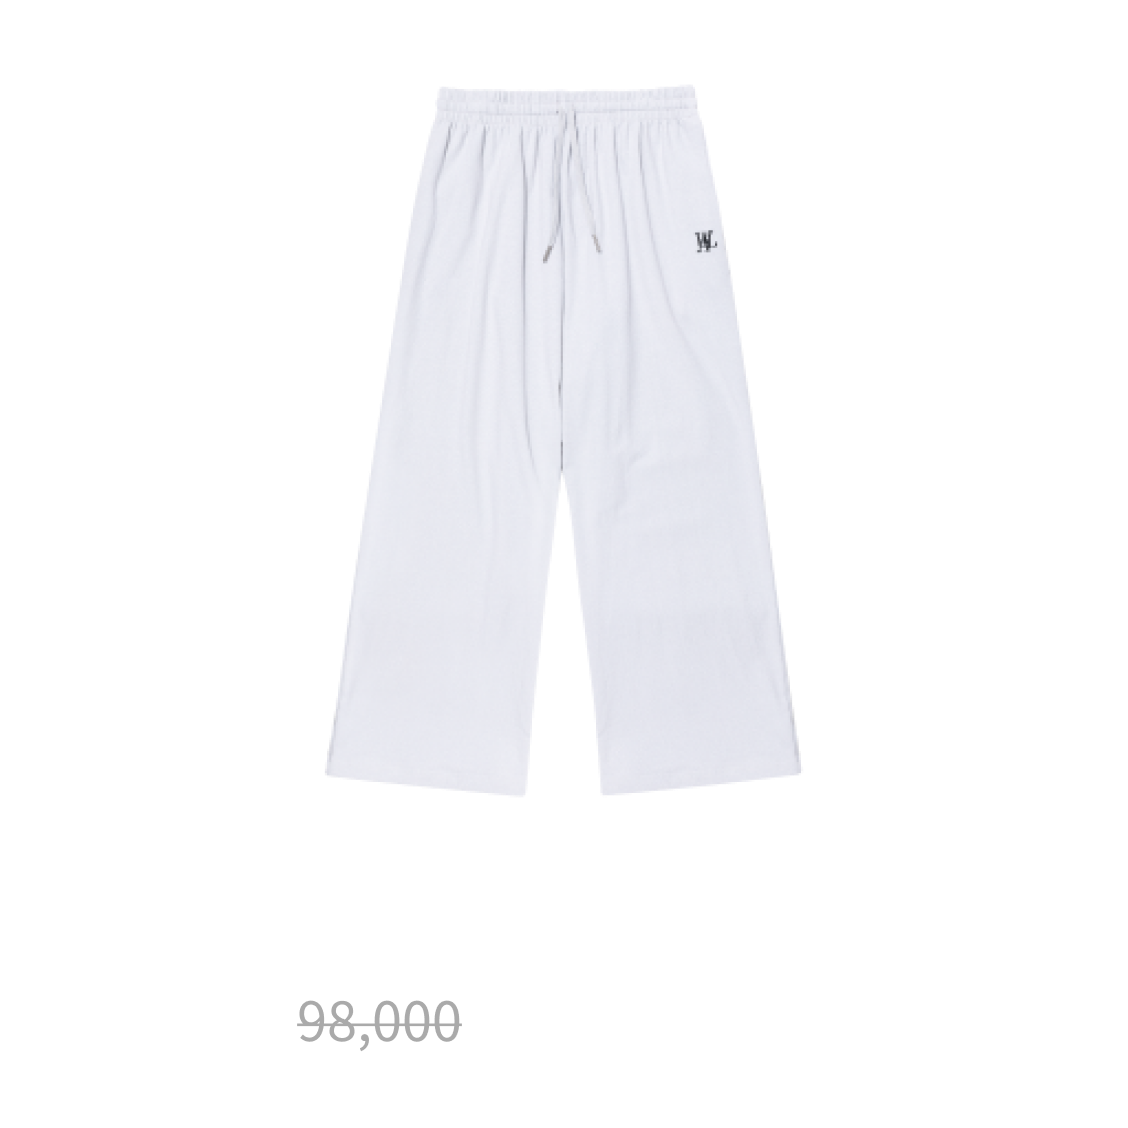 Sparkling wide pants - WHITE